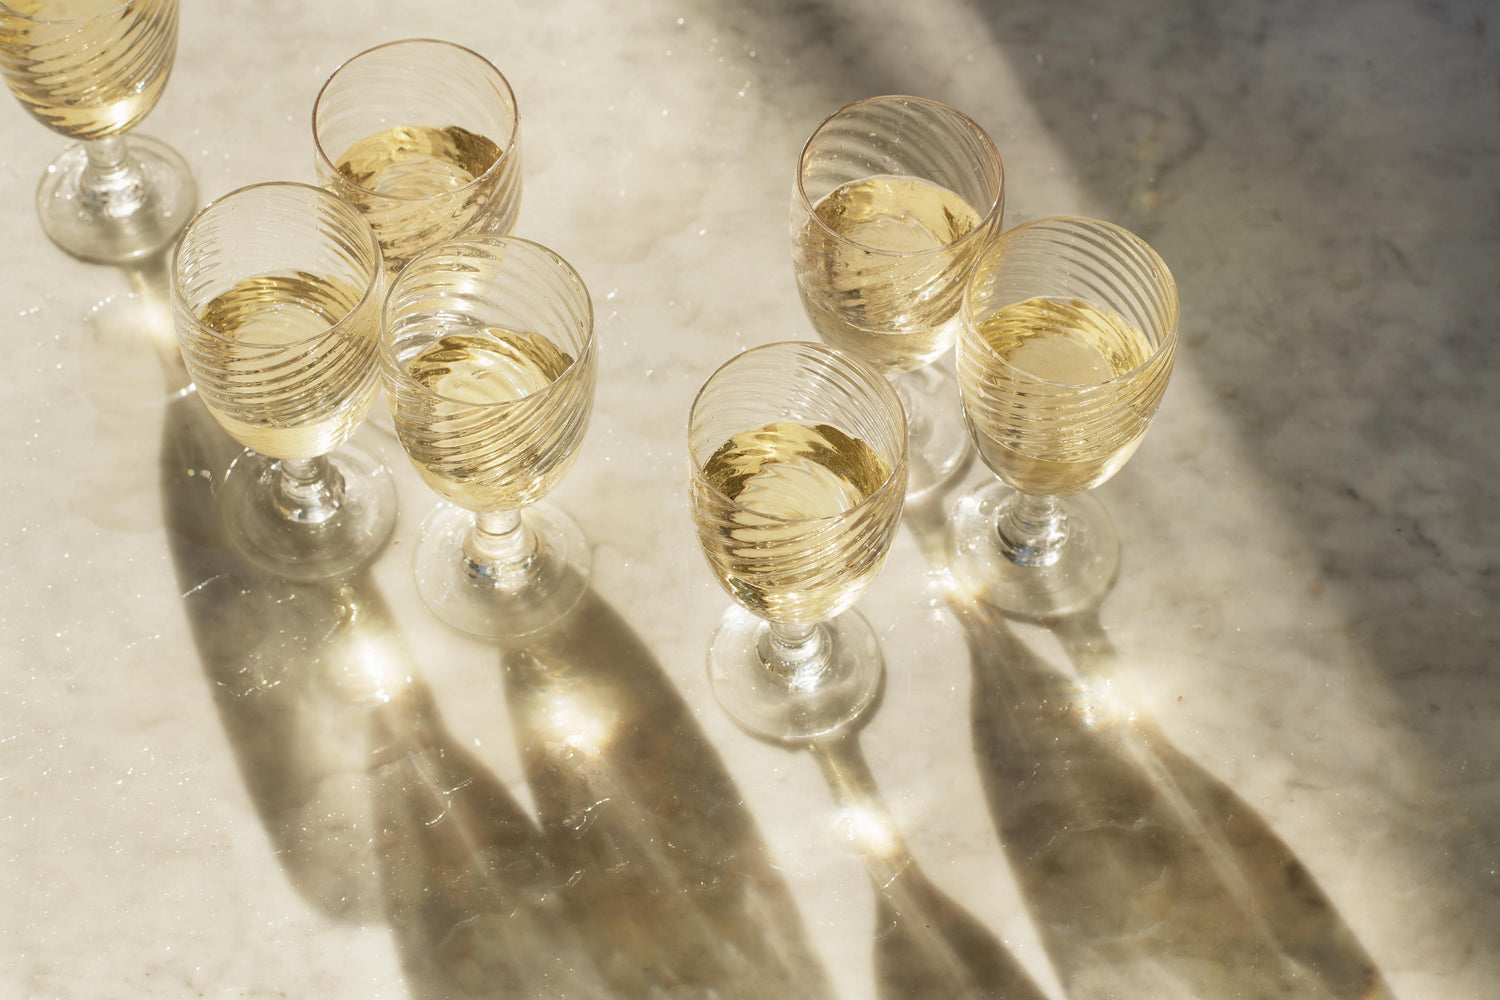 5 Somms Share: The Only Wine Glass You'll Ever Need